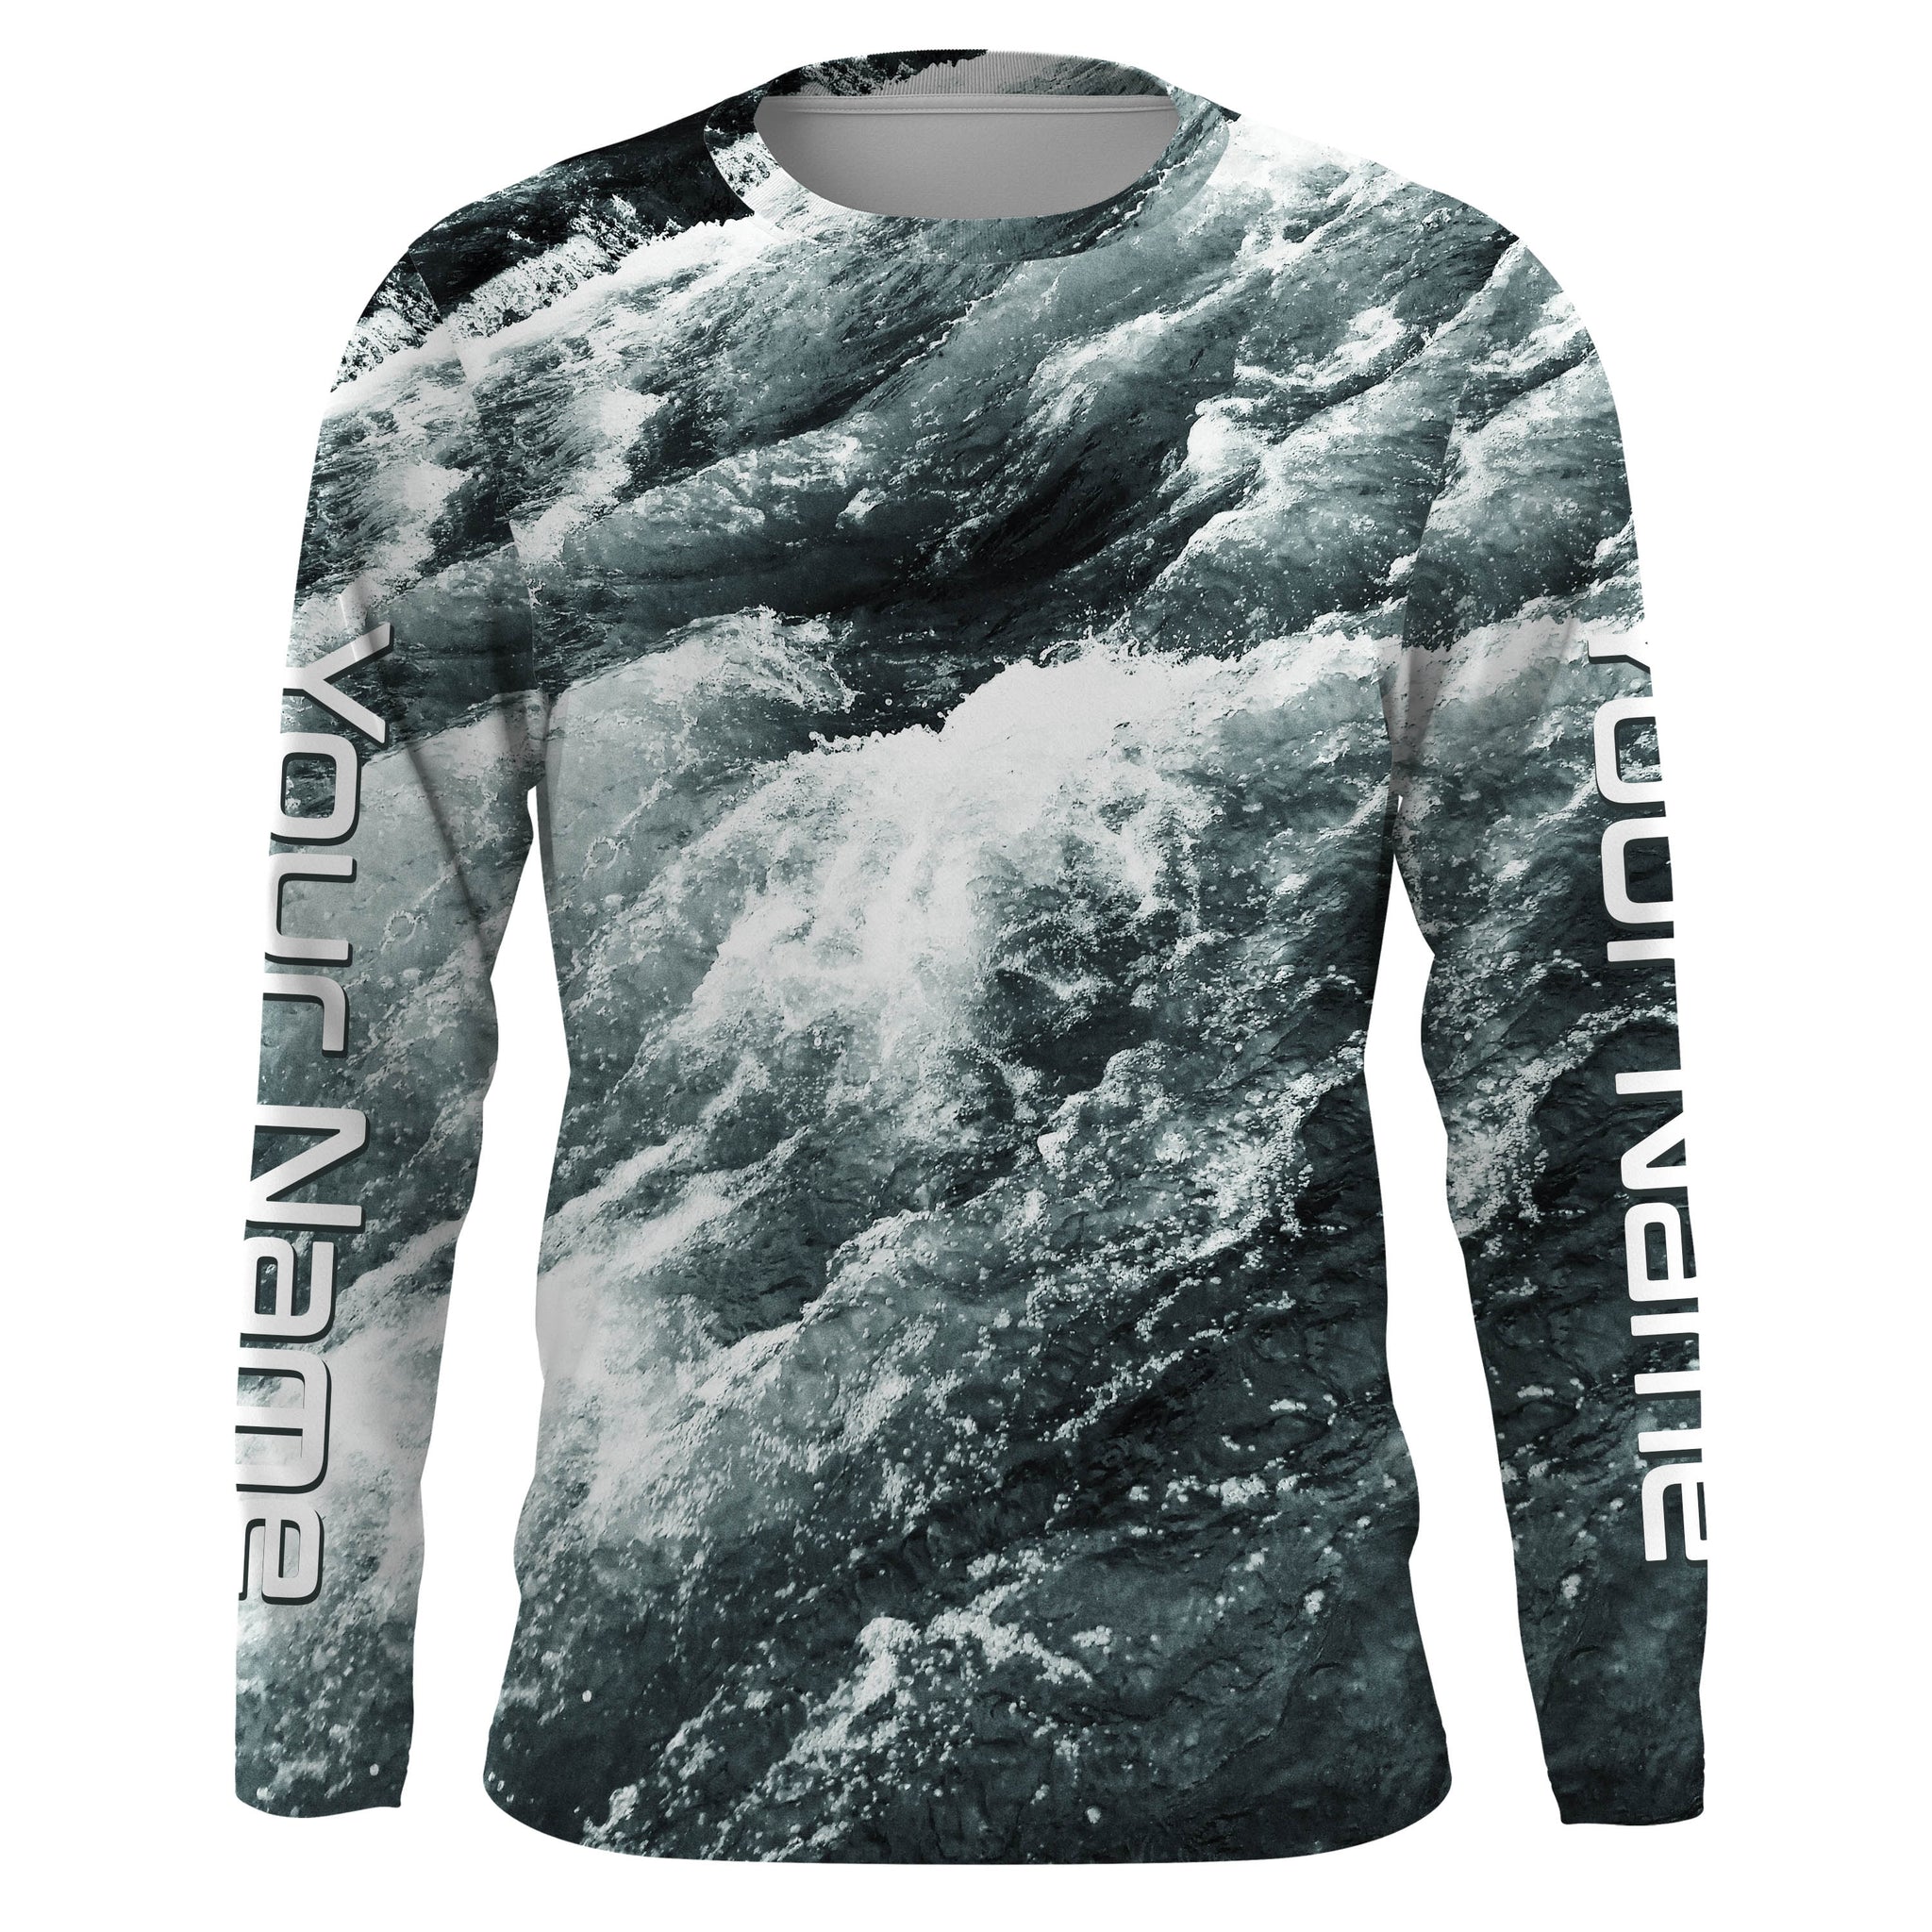 Personalized Saltwater Performnace Fishing Shirts, Sea Wave Camo Tournament Fishing Apparel IPHW1857, Long Sleeves UPF / M